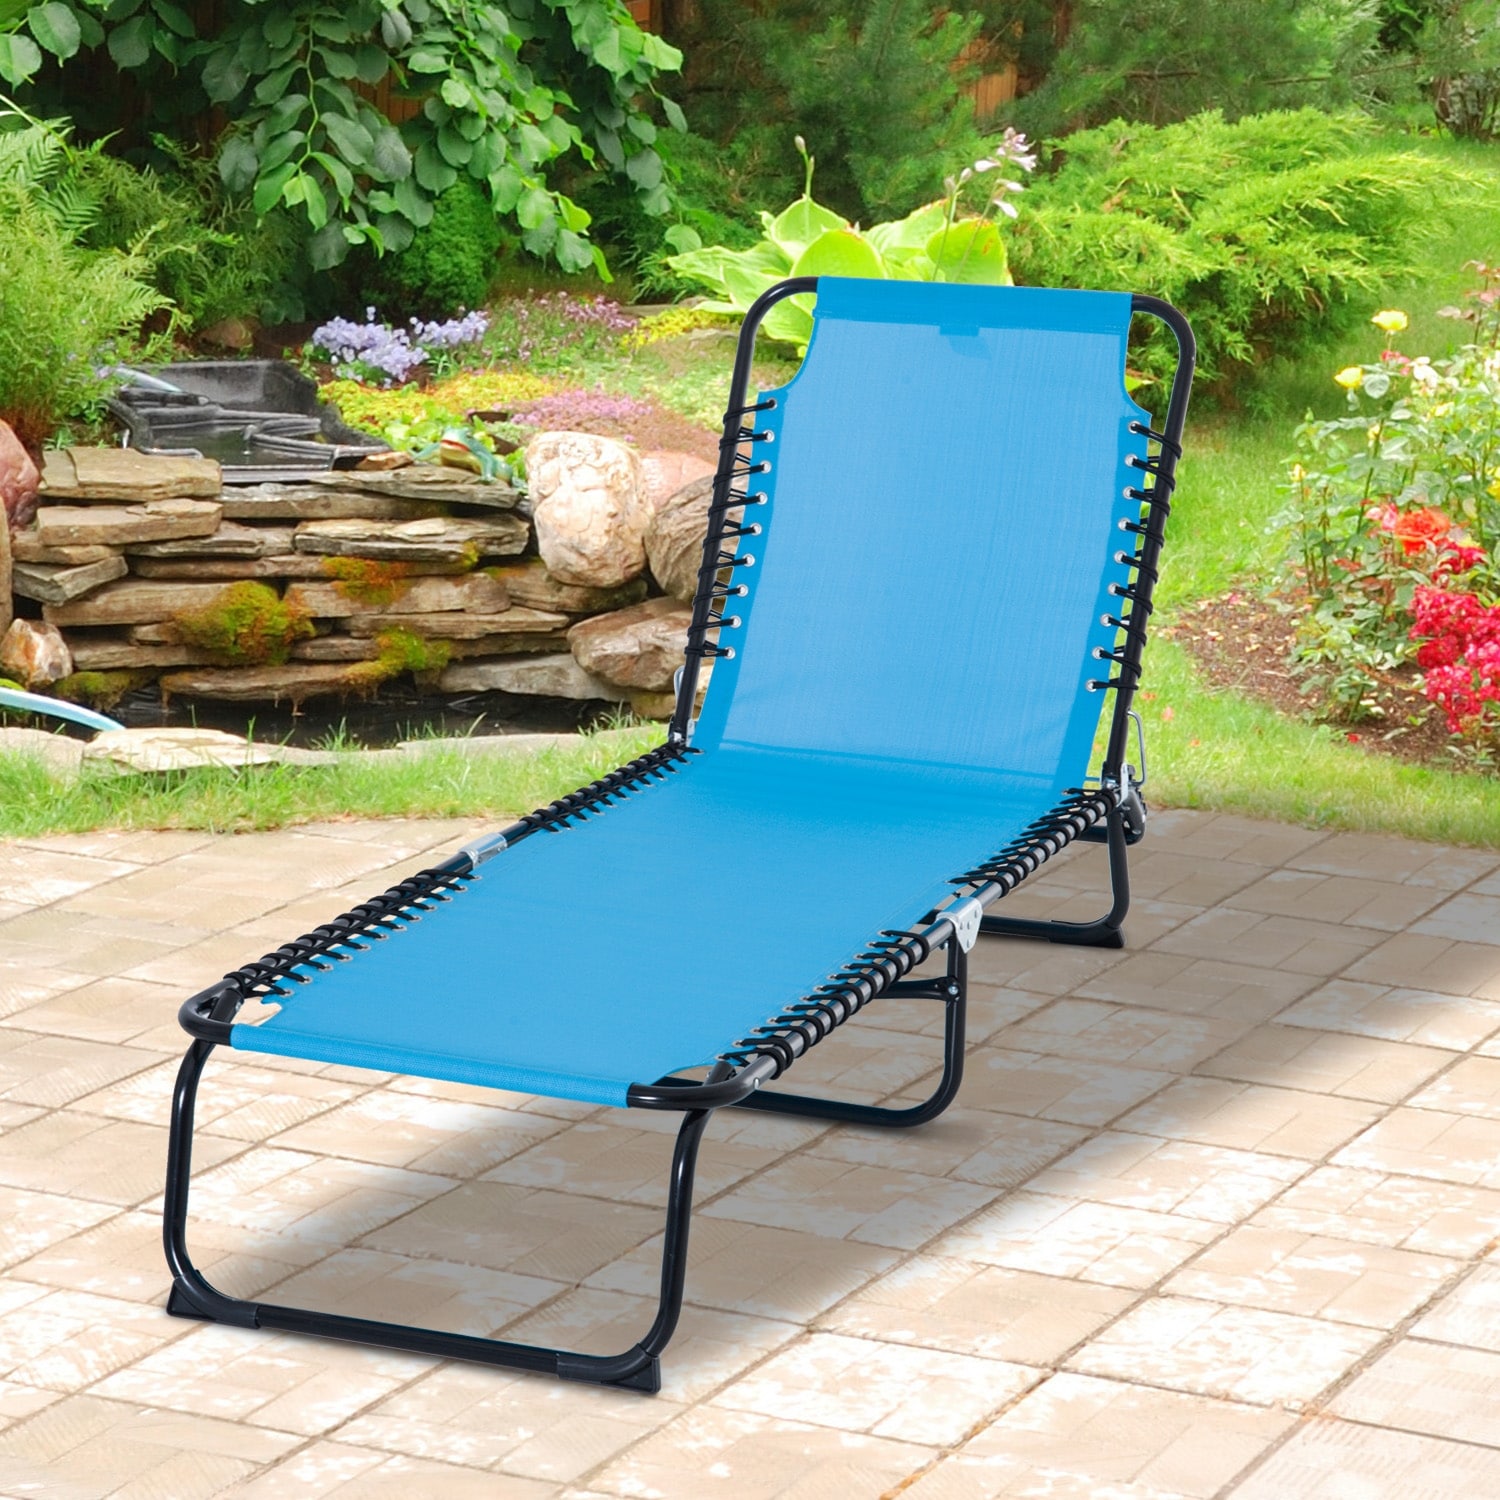 Outsunny Adjustable Reclining Beach Sun Lounger Chaise Lounge Chair Blue 